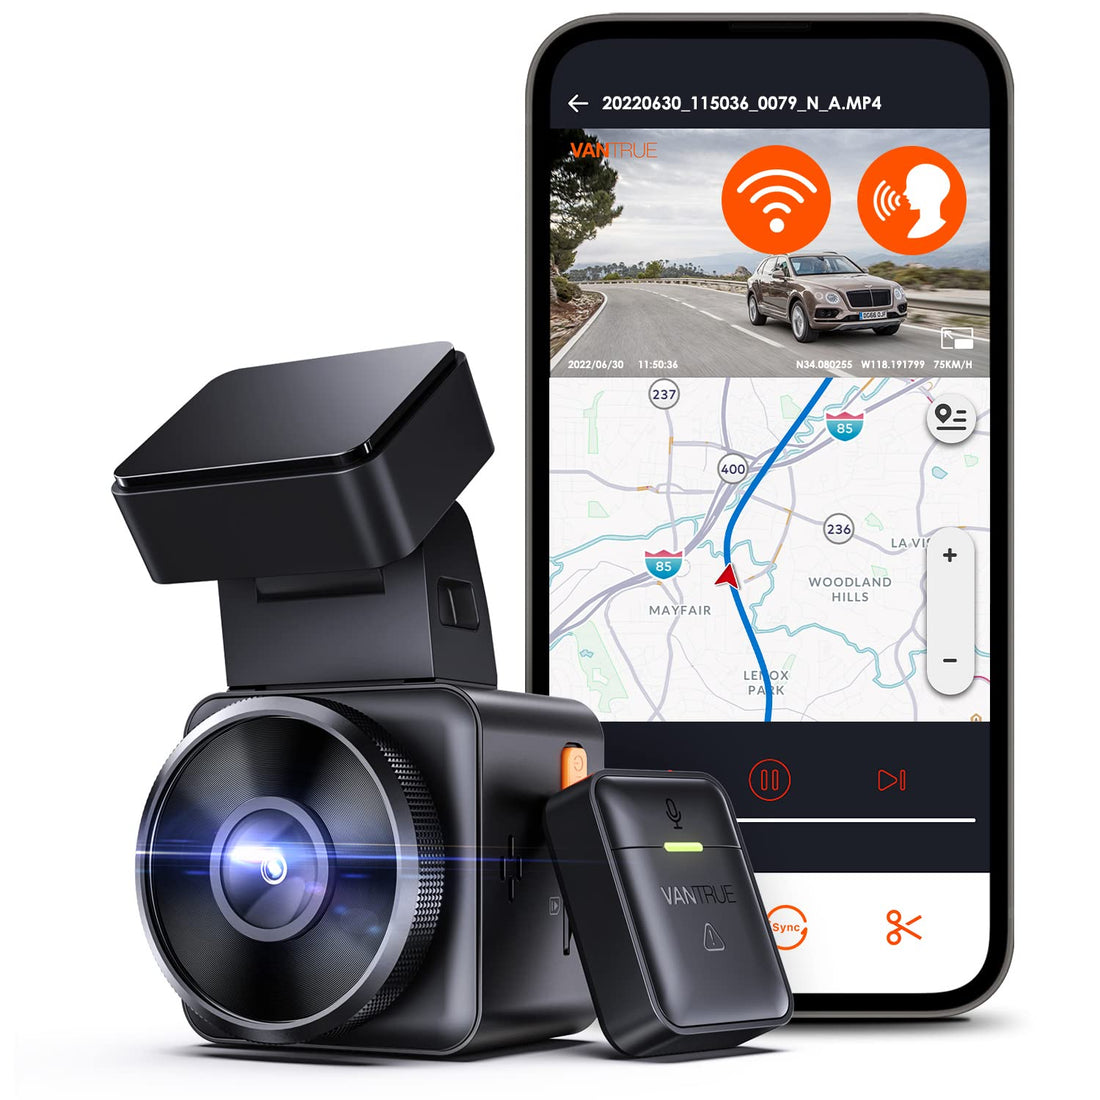 Vantrue E1 2.5K WiFi Mini Dash Cam with GPS and Speed, Voice Control Front Car Dash Camera, 24 Hours Parking Mode, Night Vision, Buffered Motion Detection, APP, Wireless Controller, Support 512GB Max